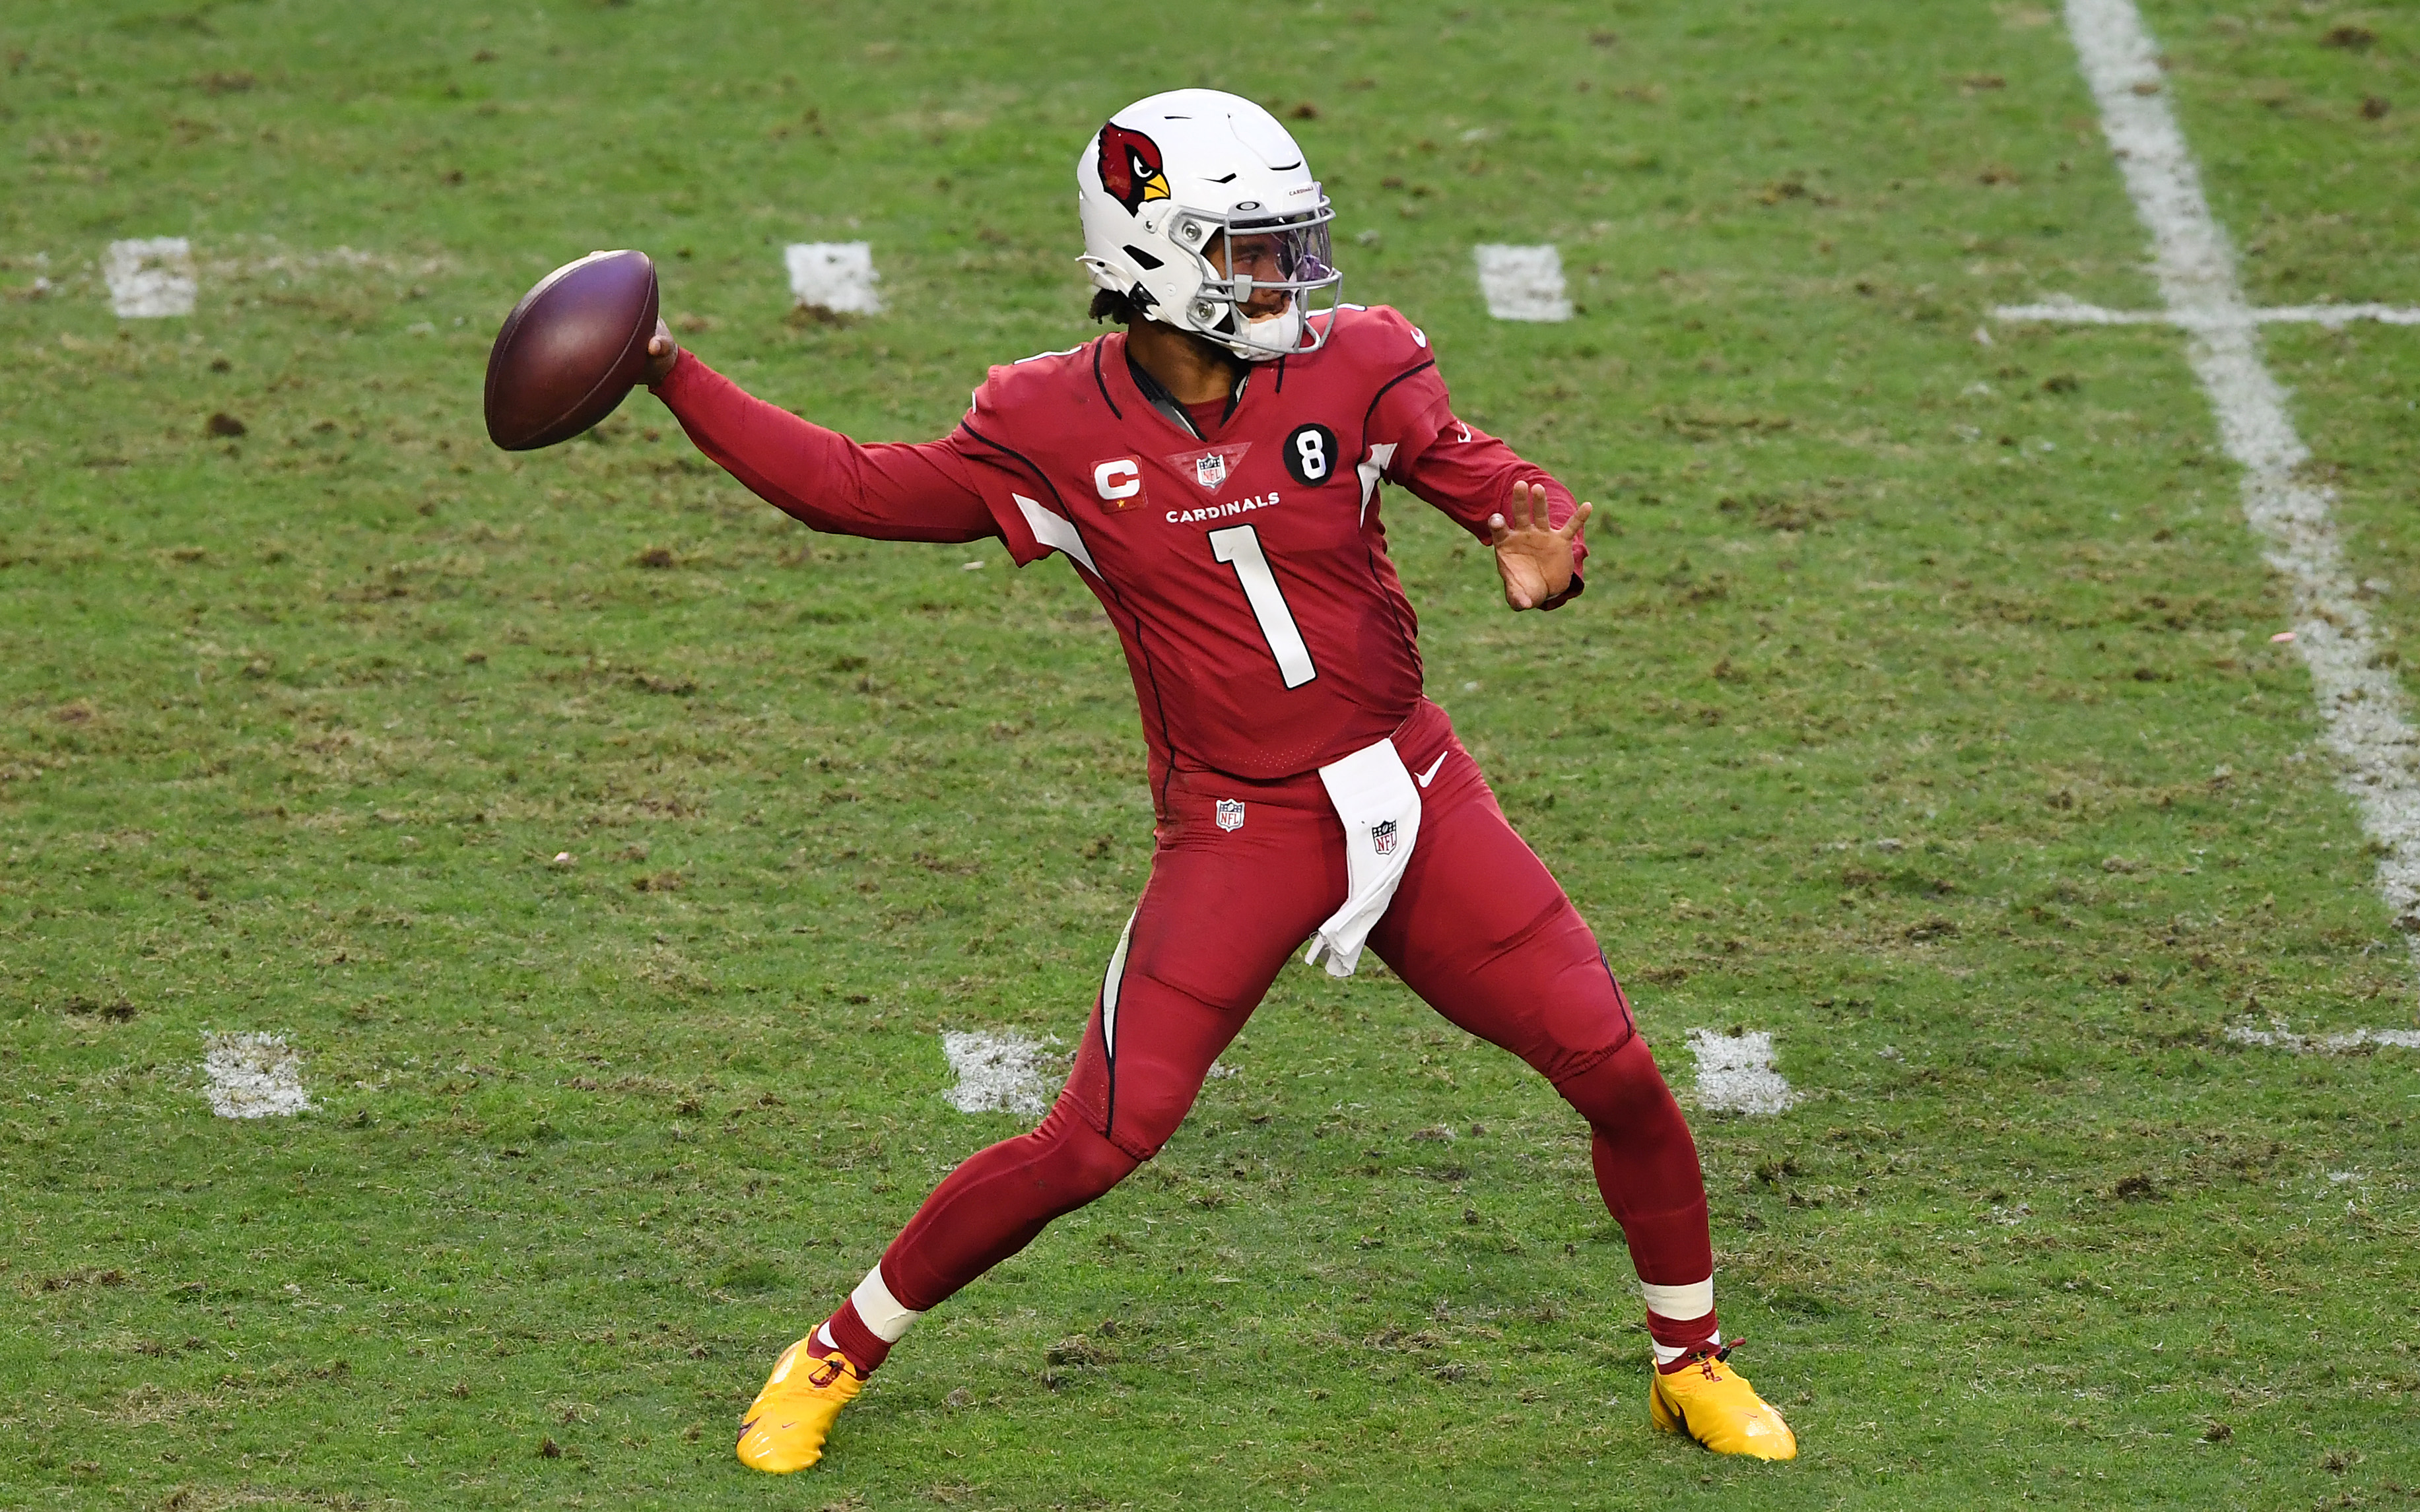 Why Vikings' Patrick Peterson mocked Cardinals, Kyler Murray with